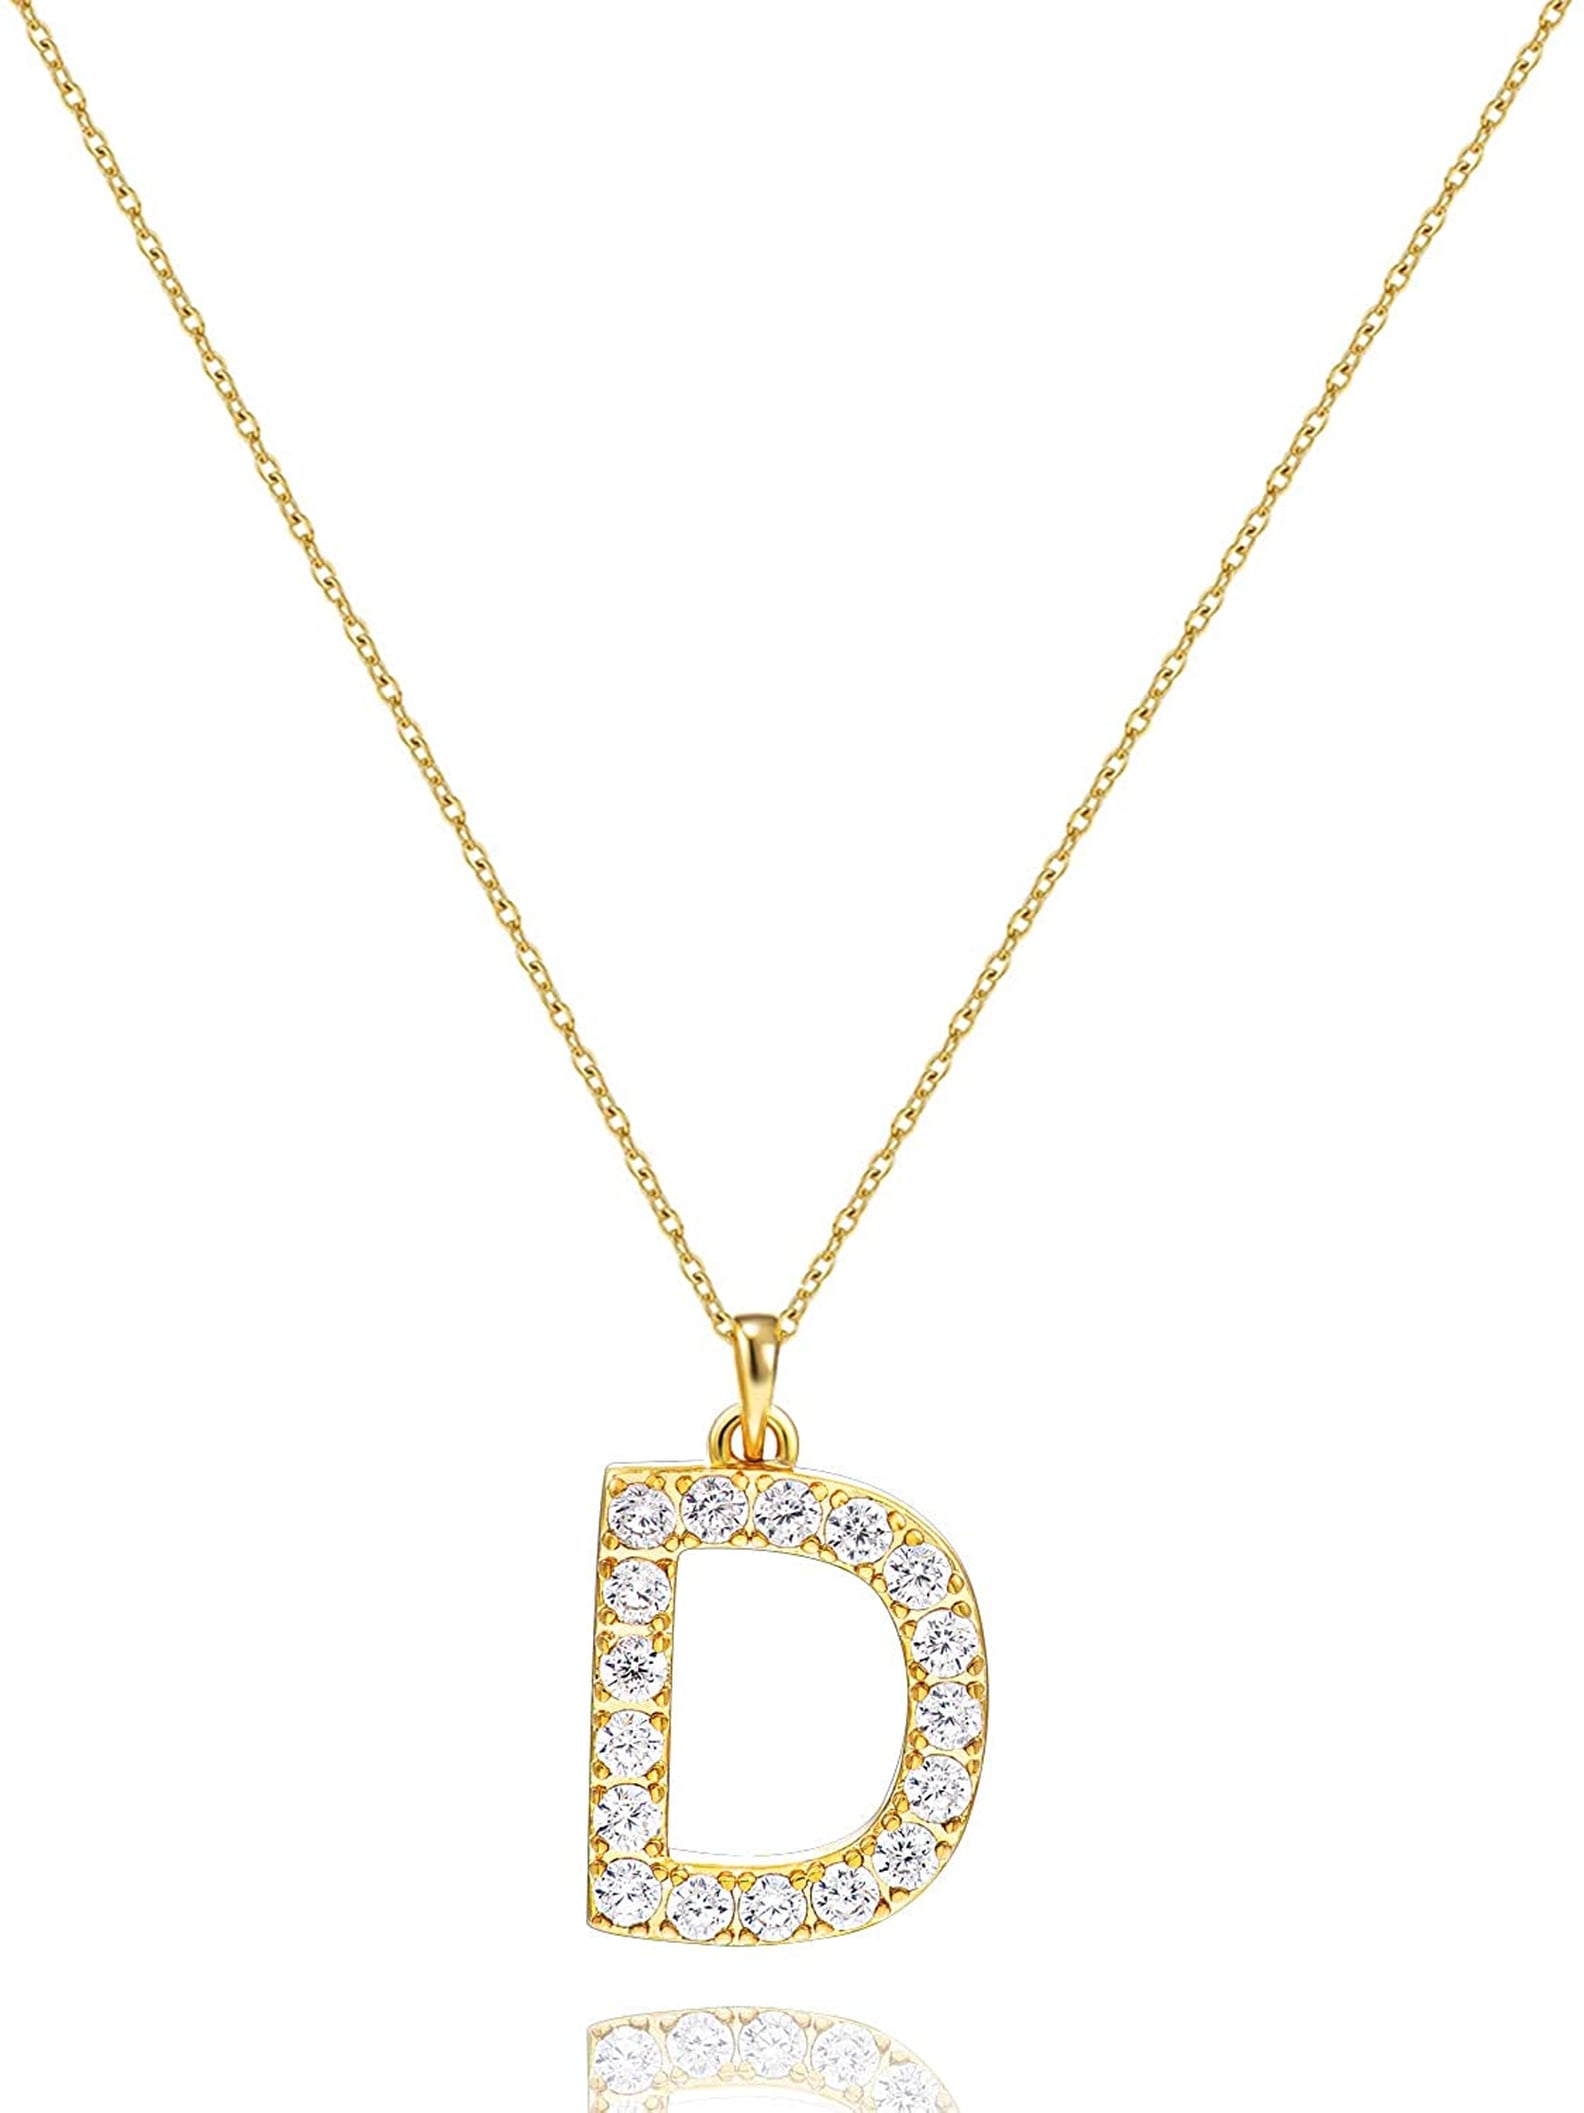 Best Initial Necklaces For Moms on Amazon | POPSUGAR Family